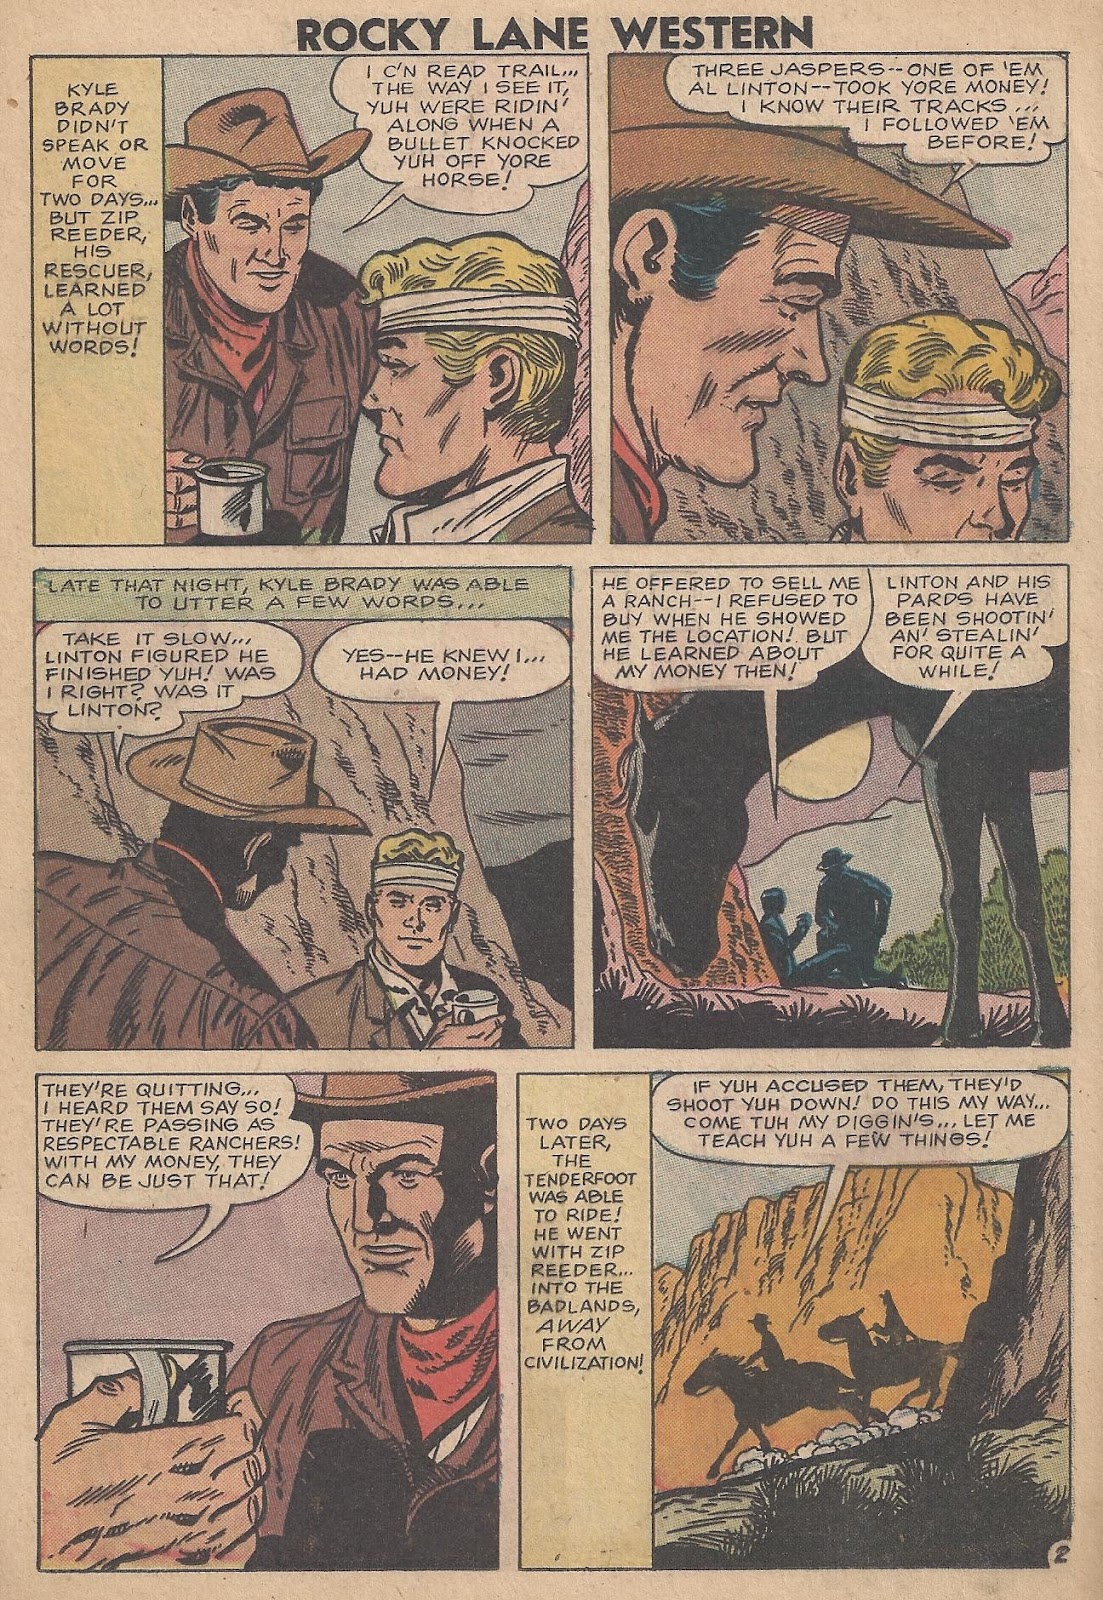 Rocky Lane Western (1954) issue 80 - Page 13